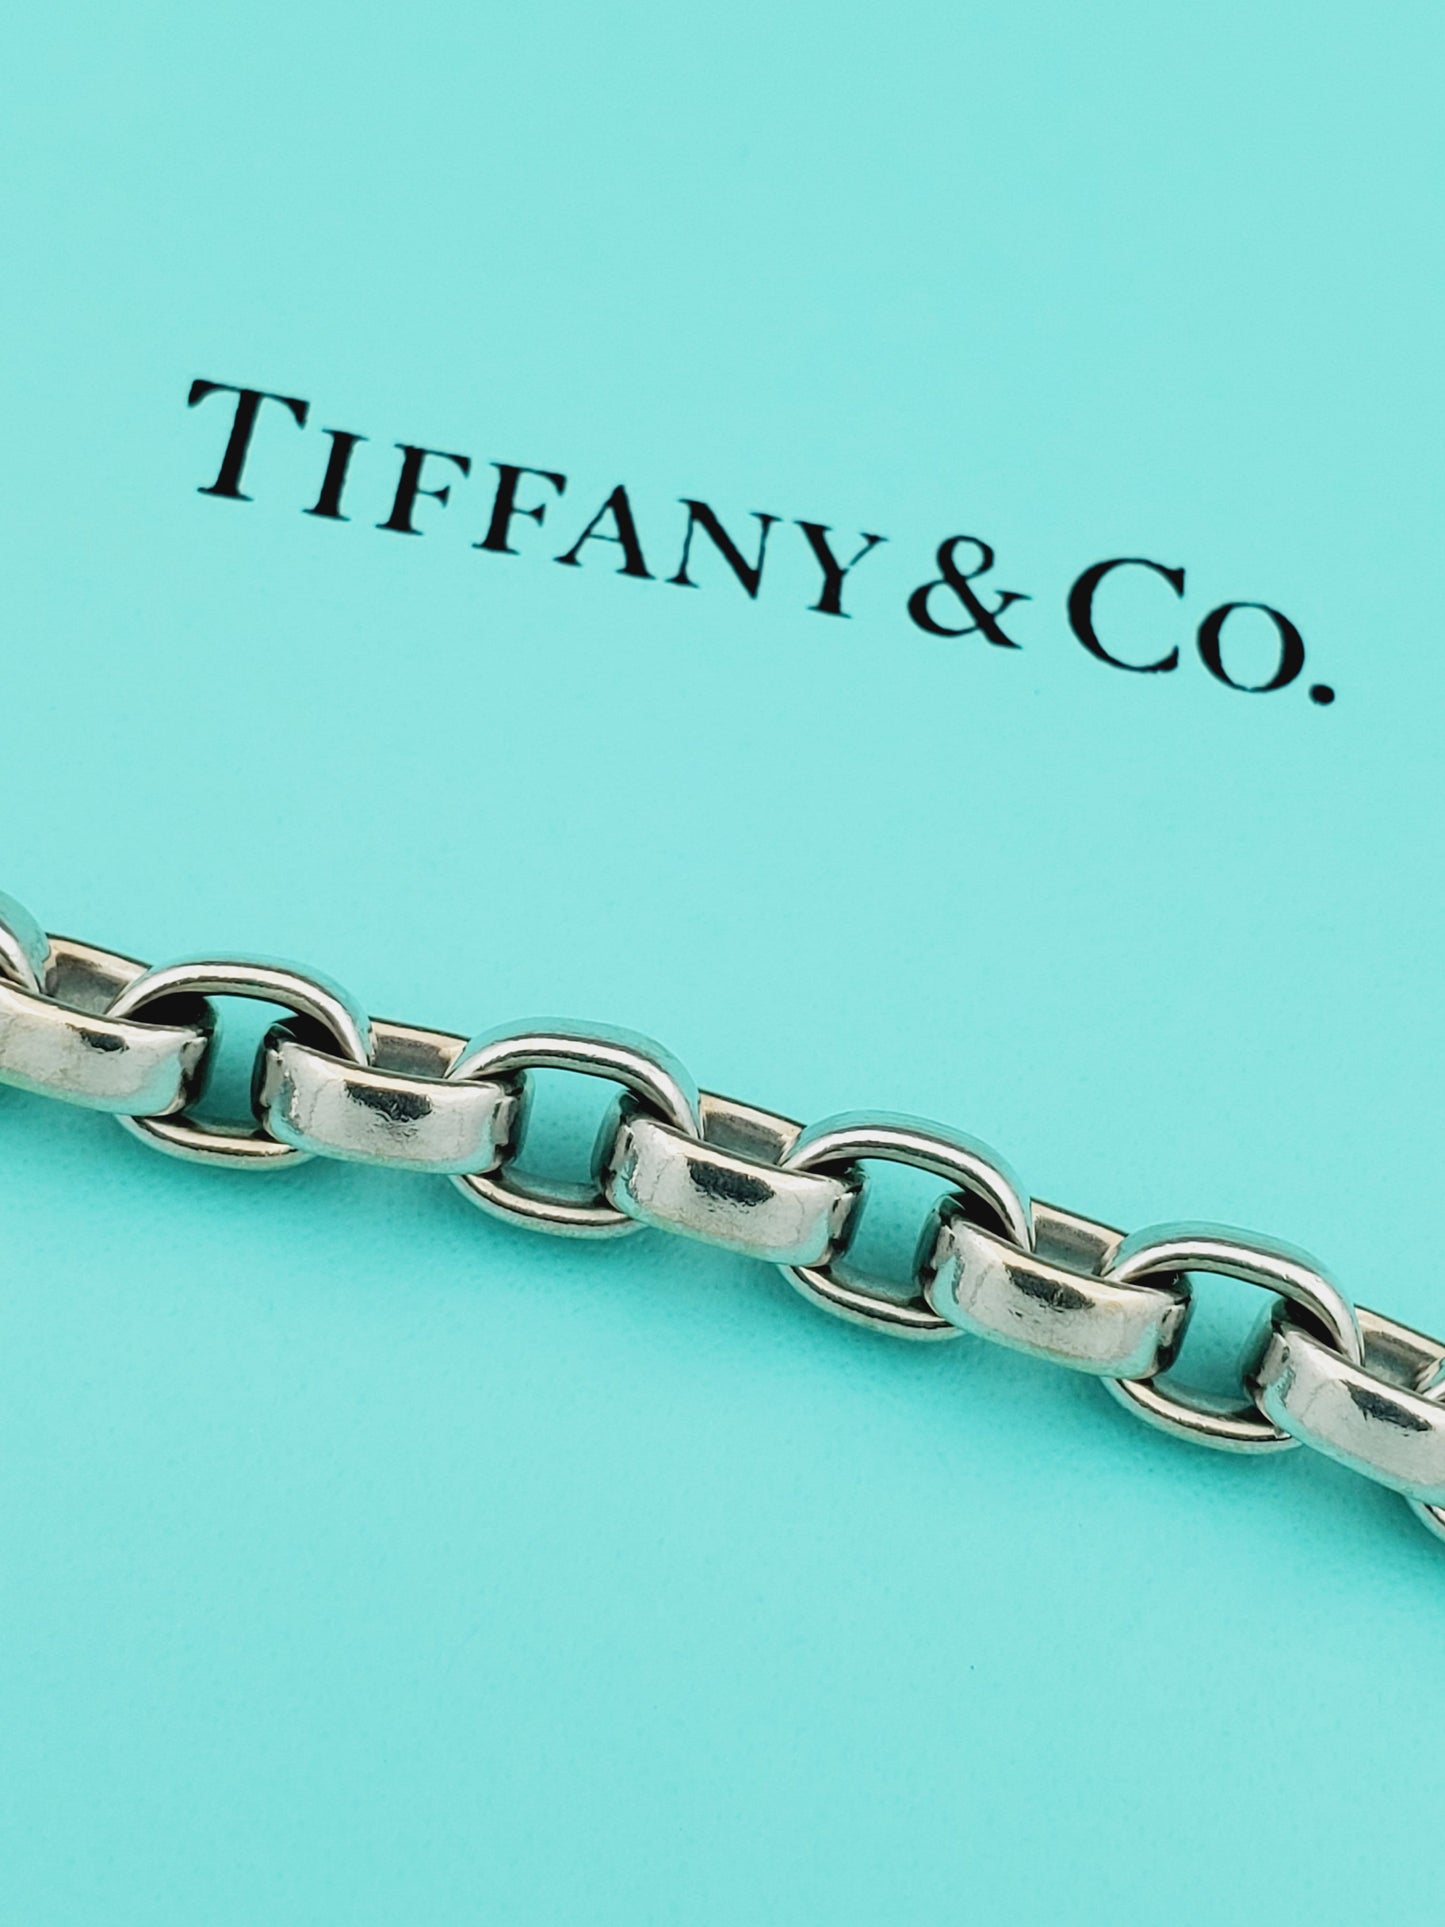 Tiffany & Co. 18K White Gold Oval Link Chain Necklace 20in. 109g.